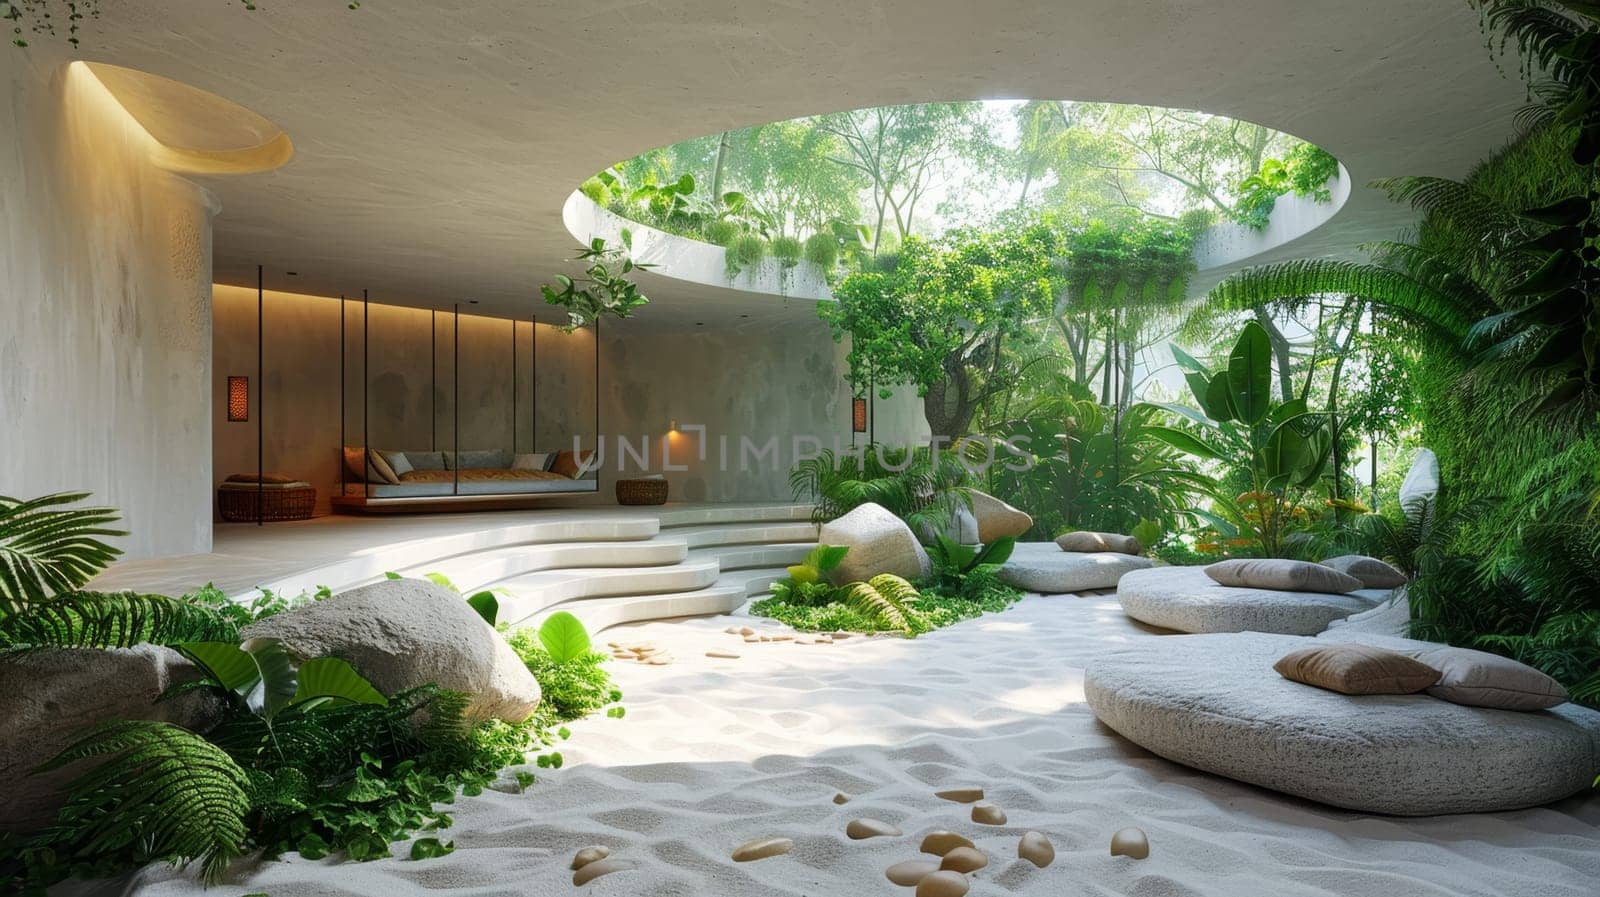 A modern interior in a house in nature. Environmental design.